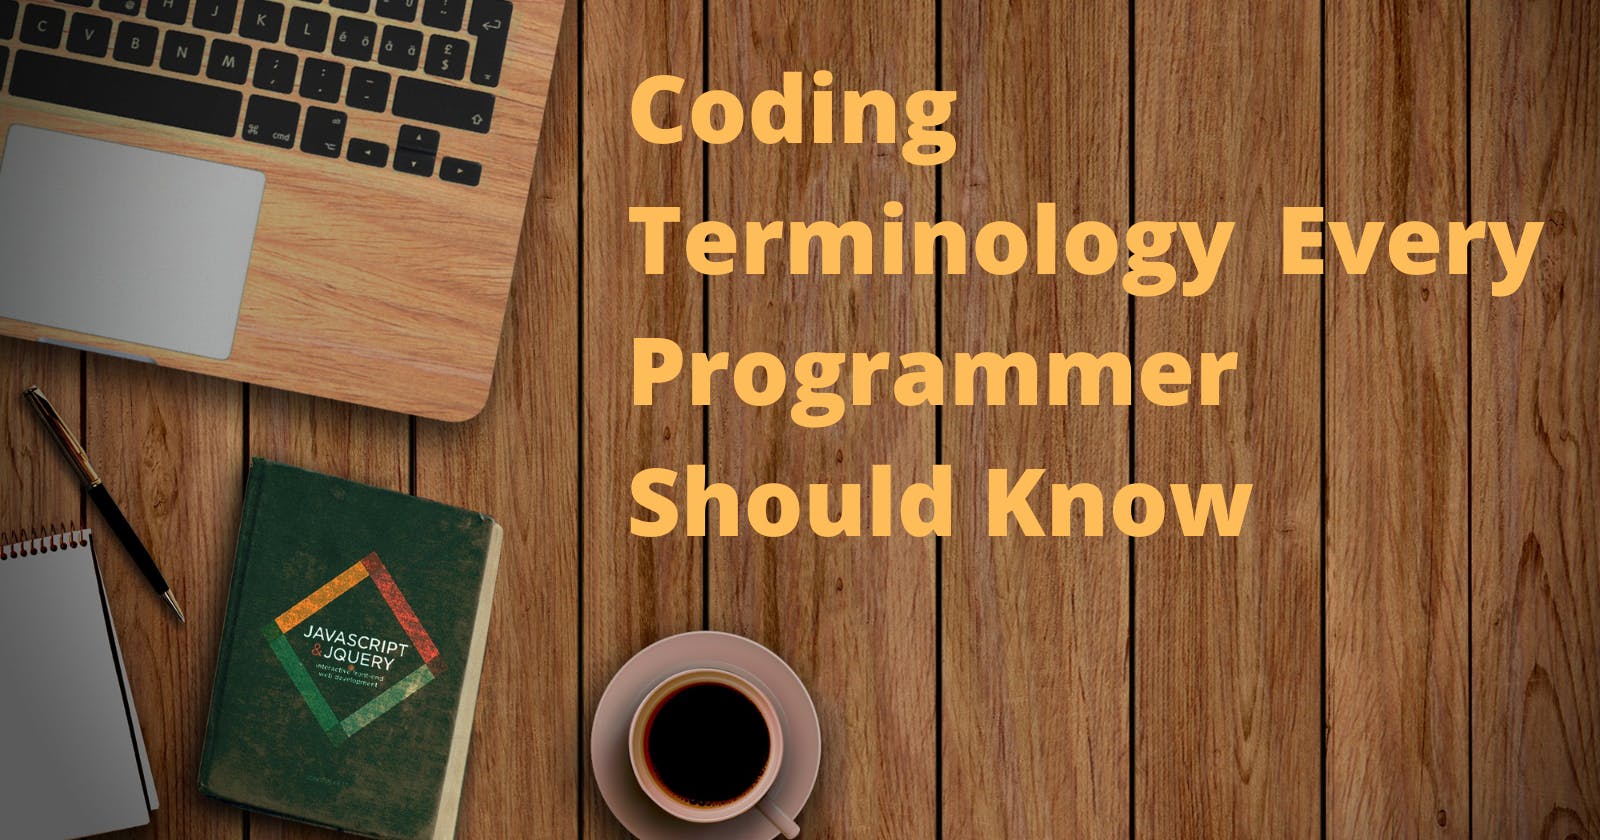 Coding Terminology every programmer should know